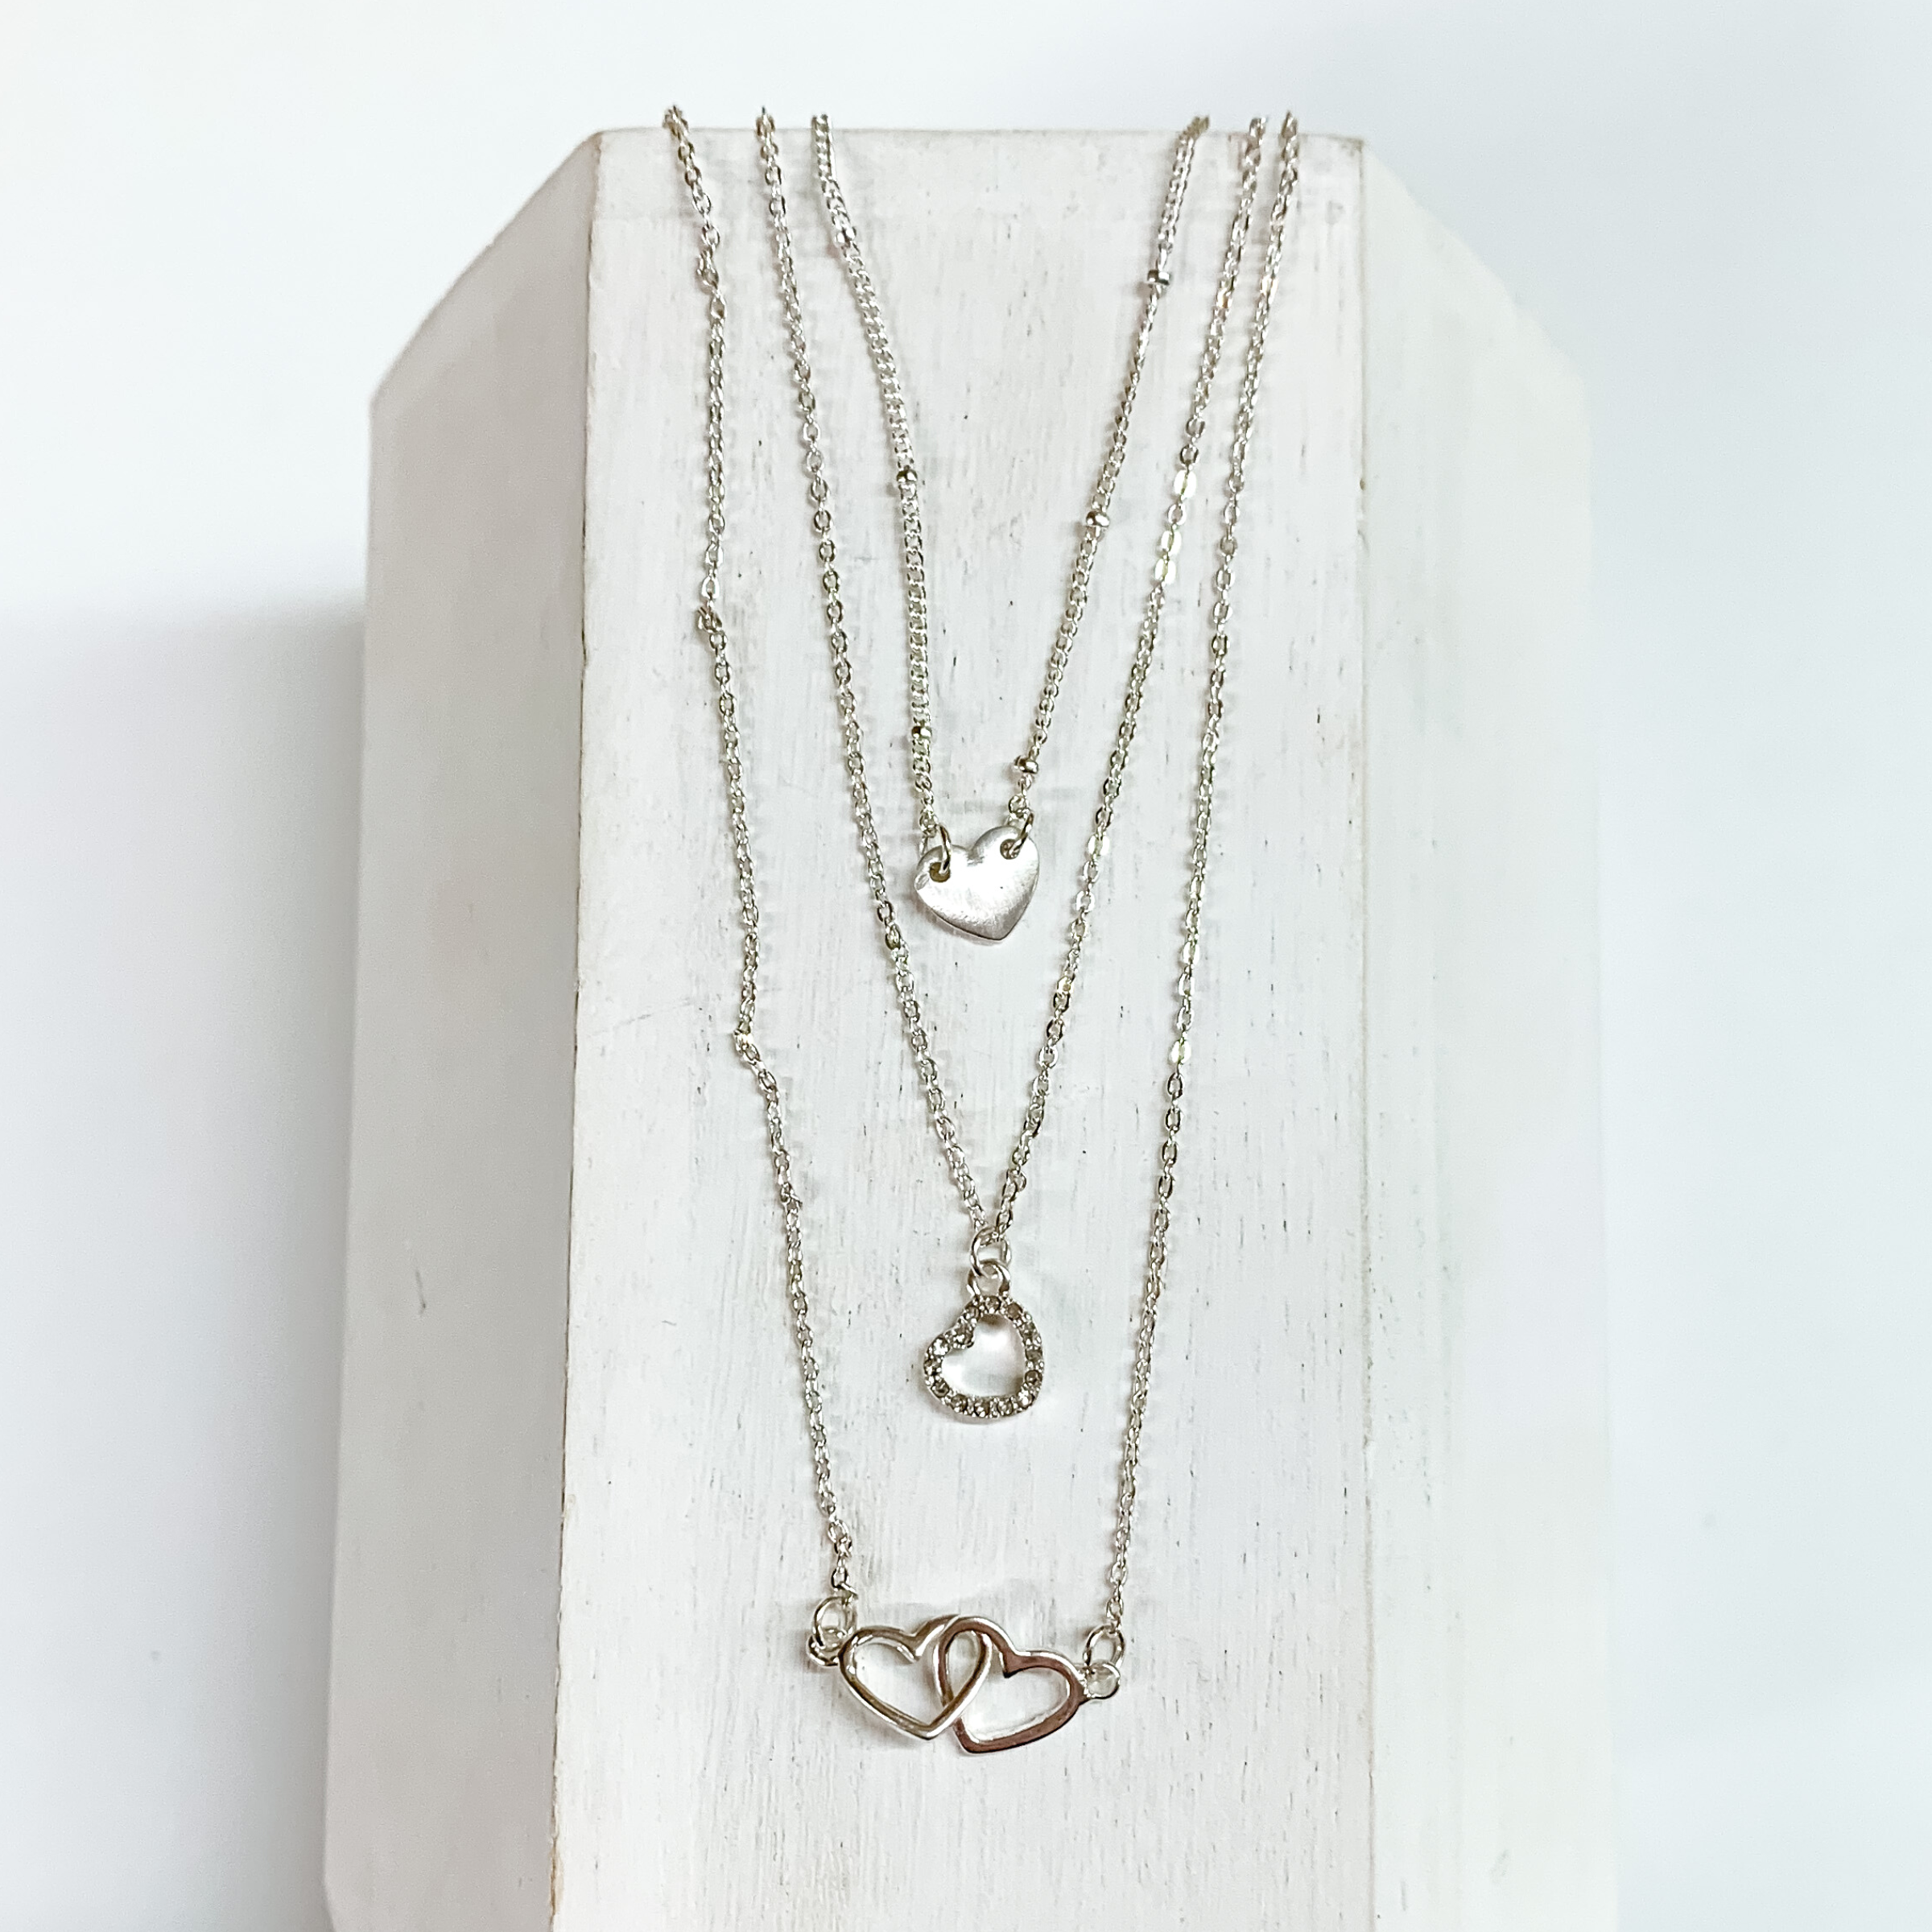 Three silver chain strands each with a heart pendant. The shortest strand has a plain silver heart, medium chain has a heart outline pendant, and the longest strand has two interlocking hearts pendant. This necklace is pictured on a white block on a white background. 